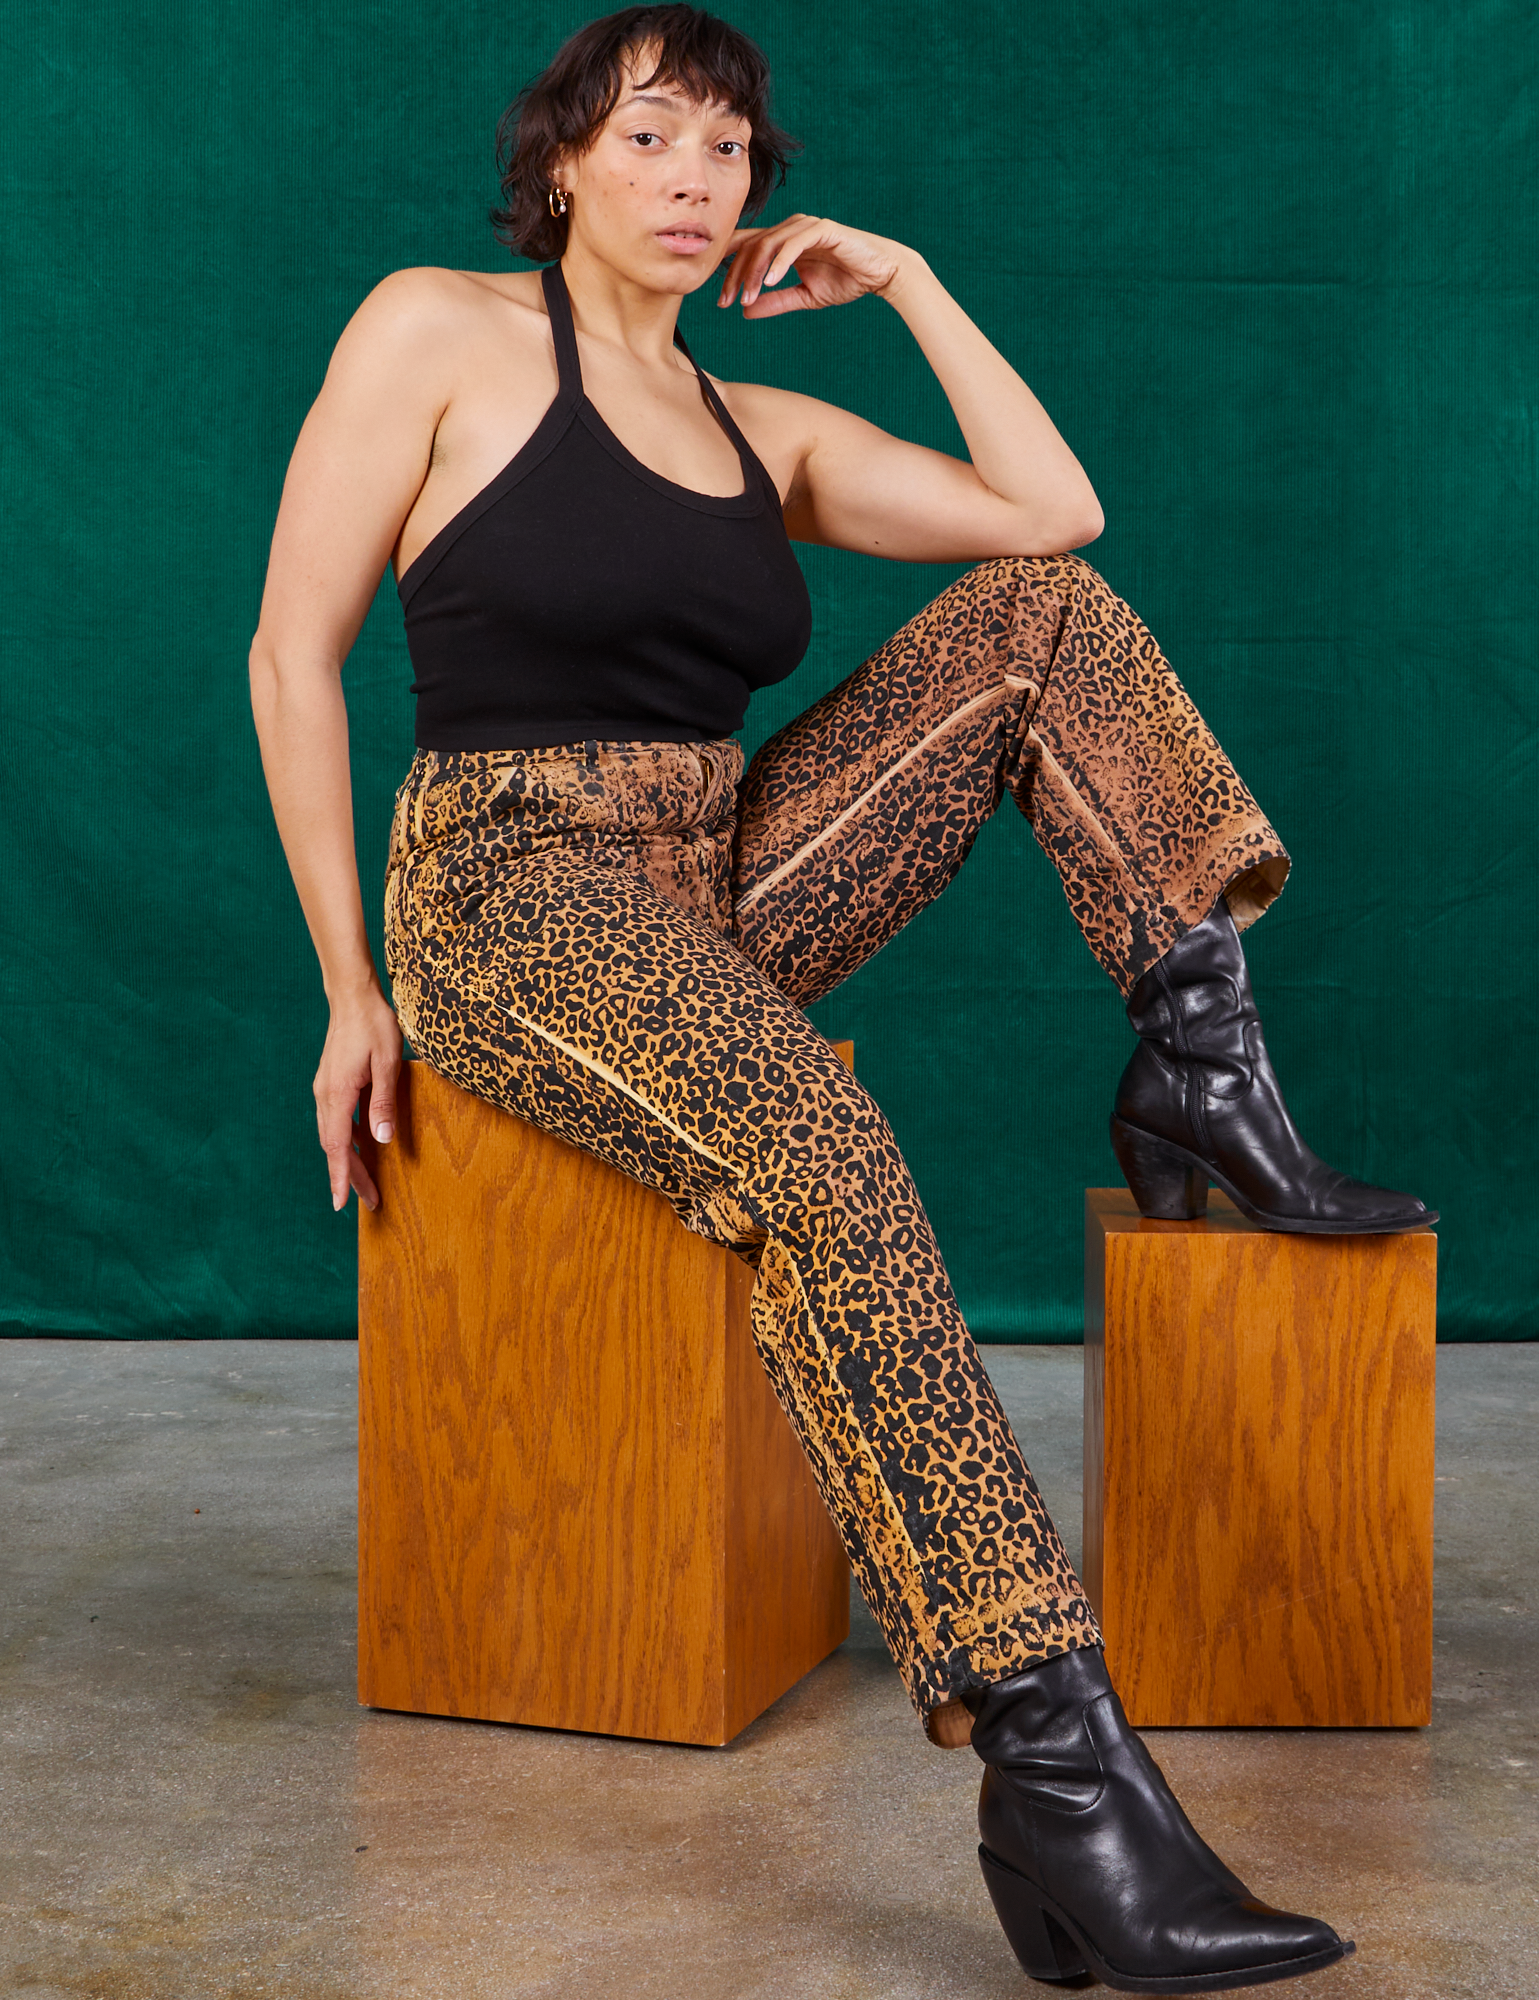 Tiara is wearing Leopard Work Pants paired with black Halter Top